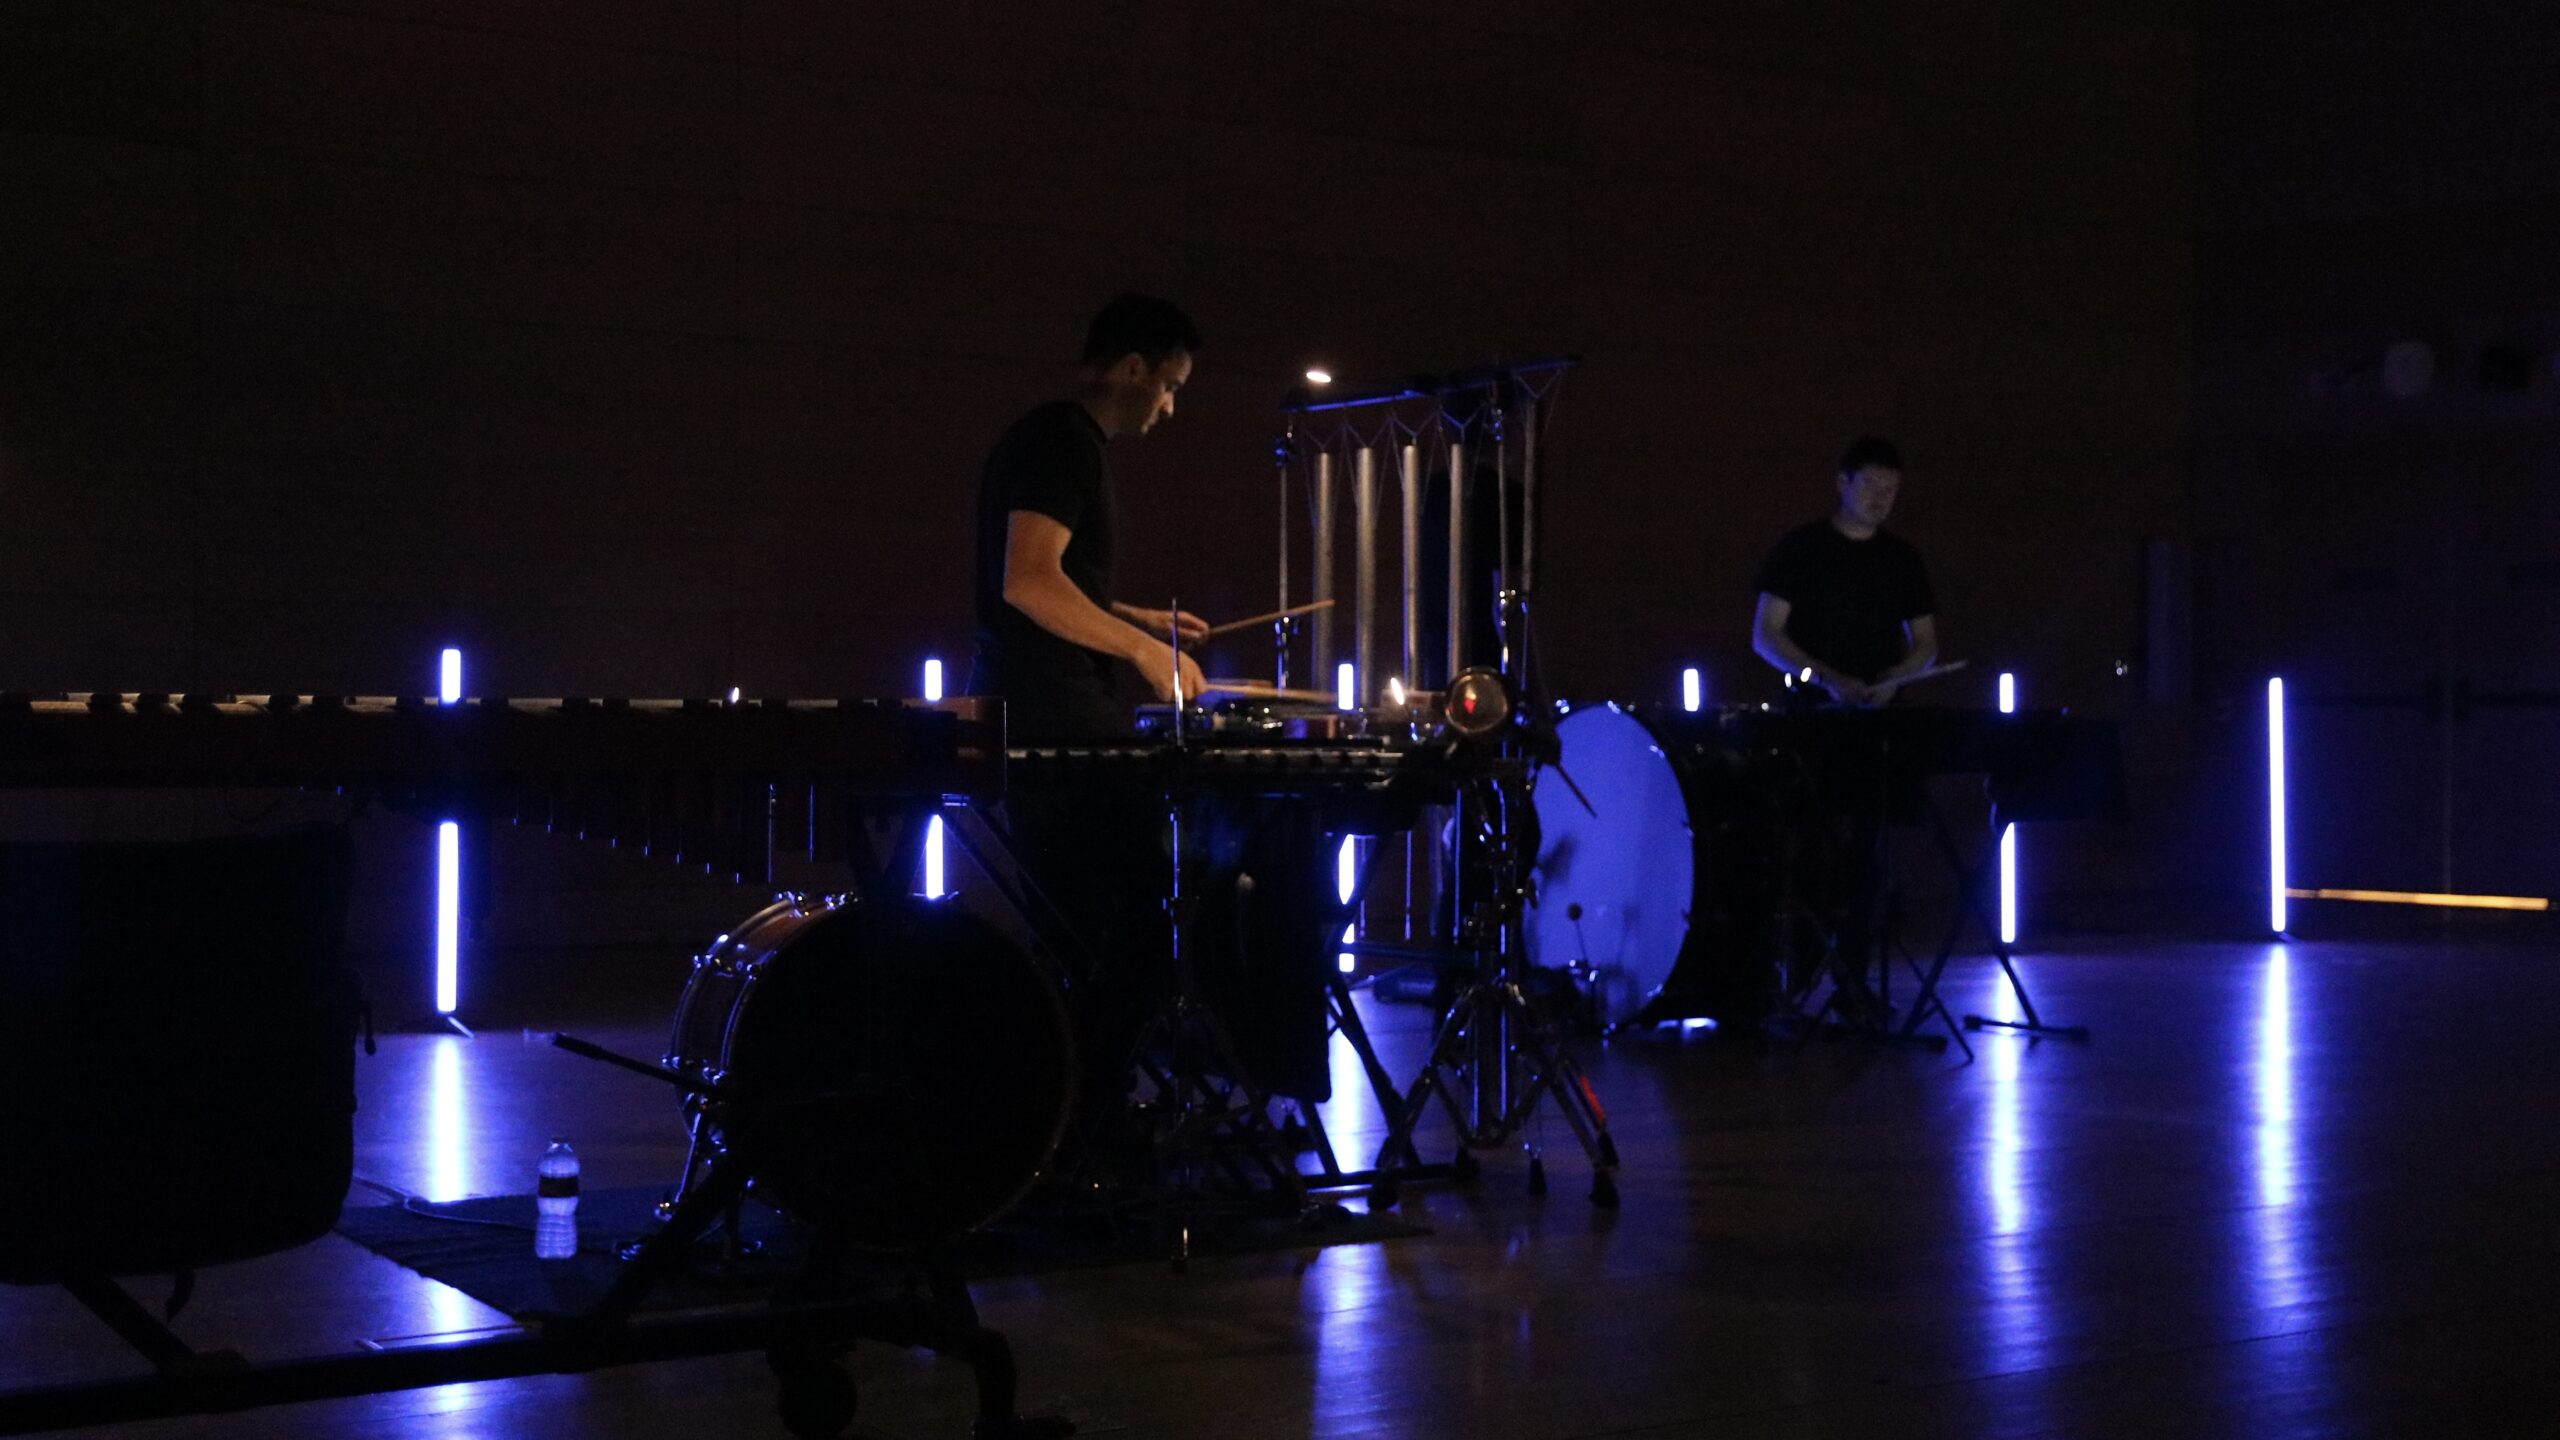 two members of the ensemble surrounded by blue lights as they play their instruments during Thursday night’s performance in the Tishman auditorium.